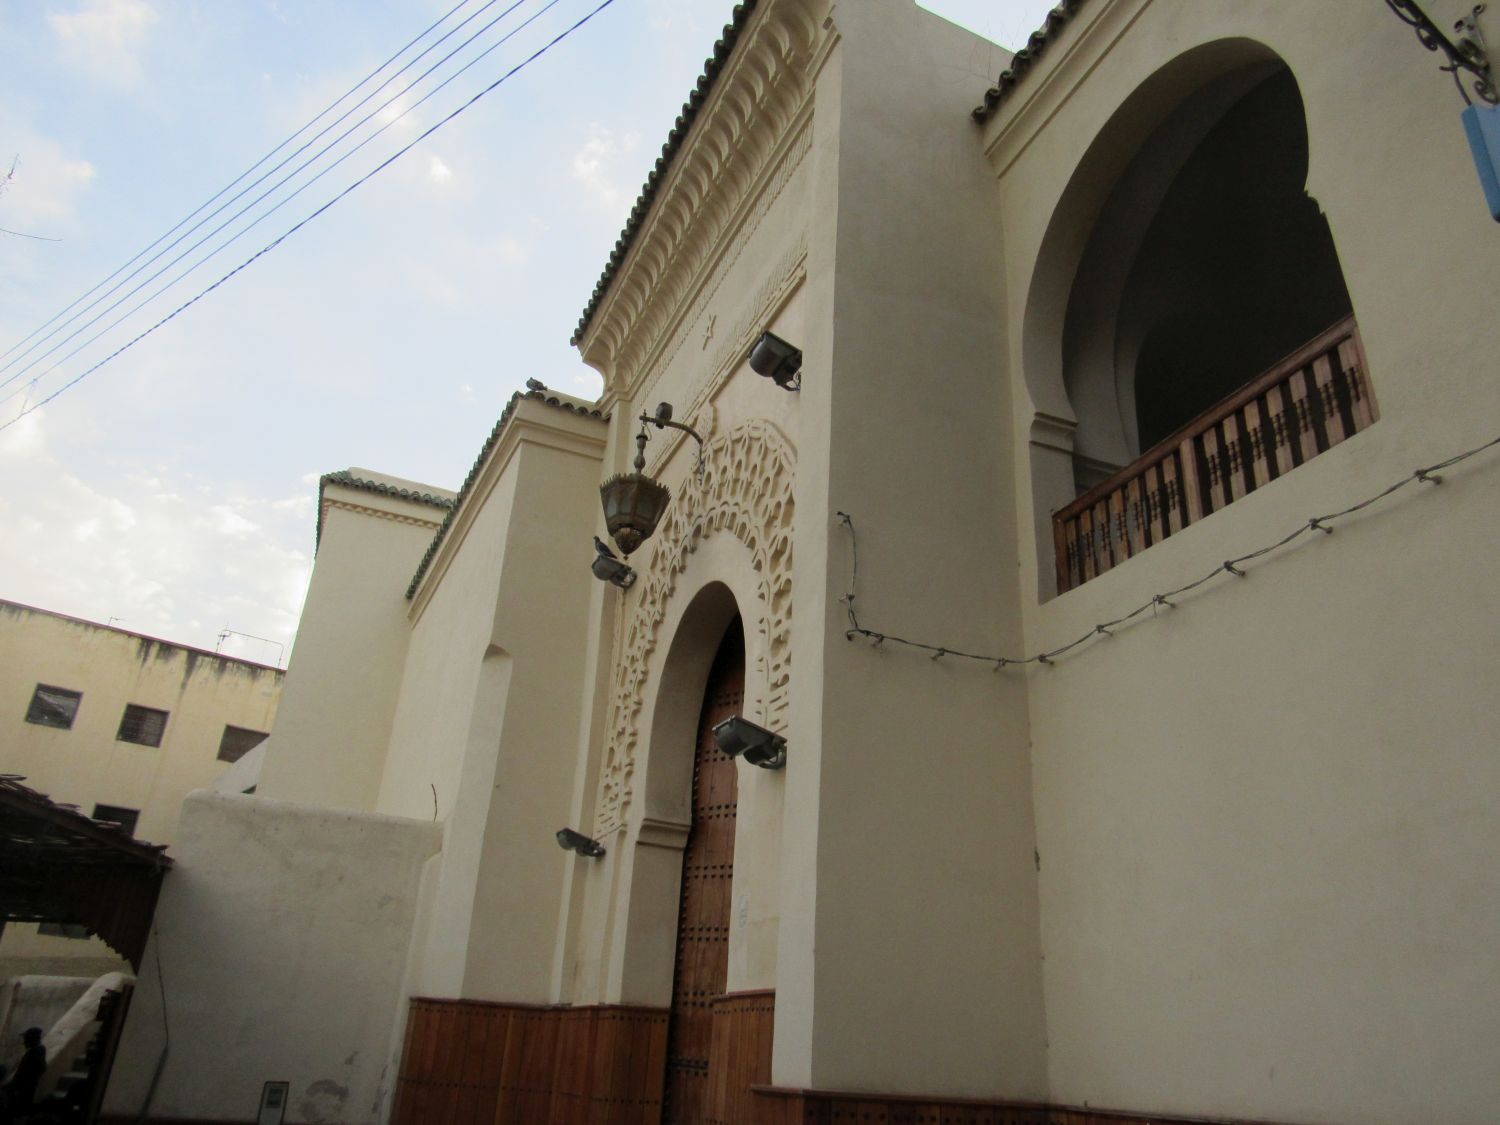 Bab Guissa Mosque and Madrasa - Exterior, lateral view, main entrance.